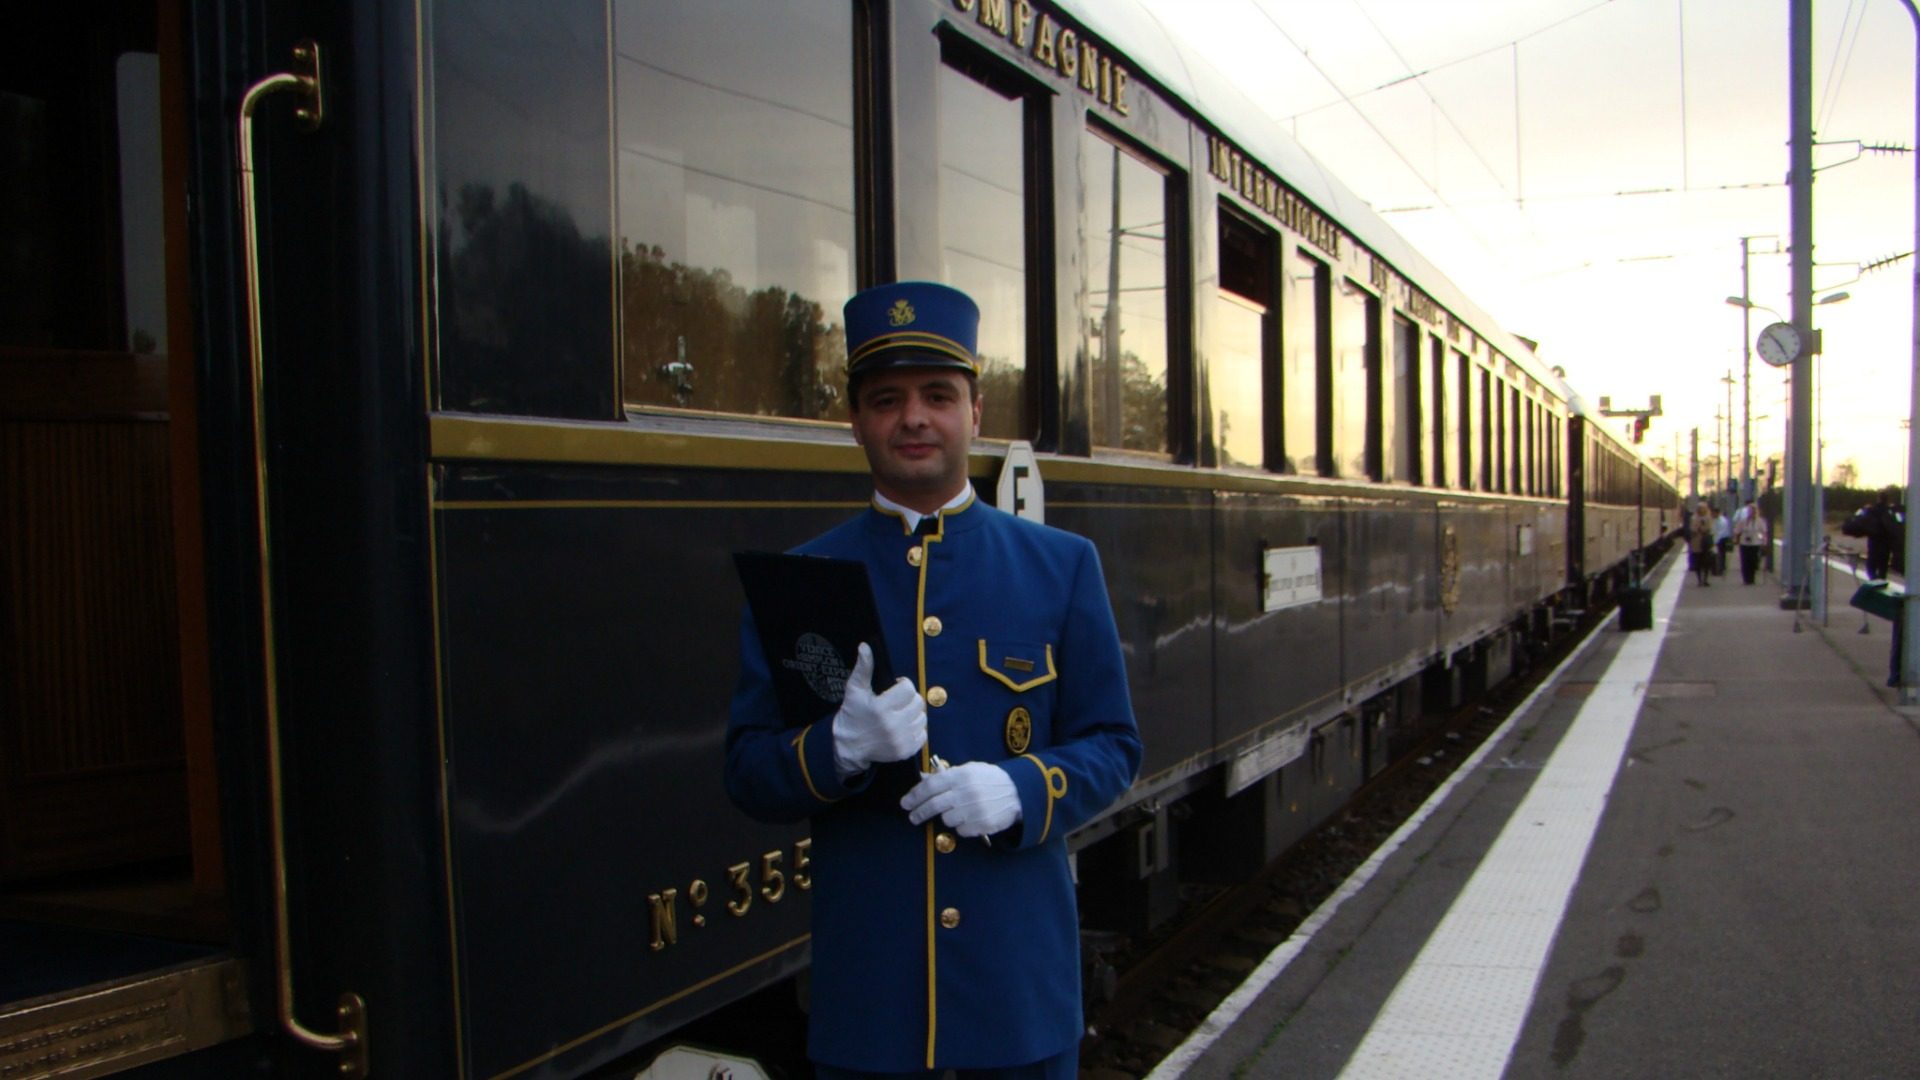 The Orient Express: The Most Famous Train in the World